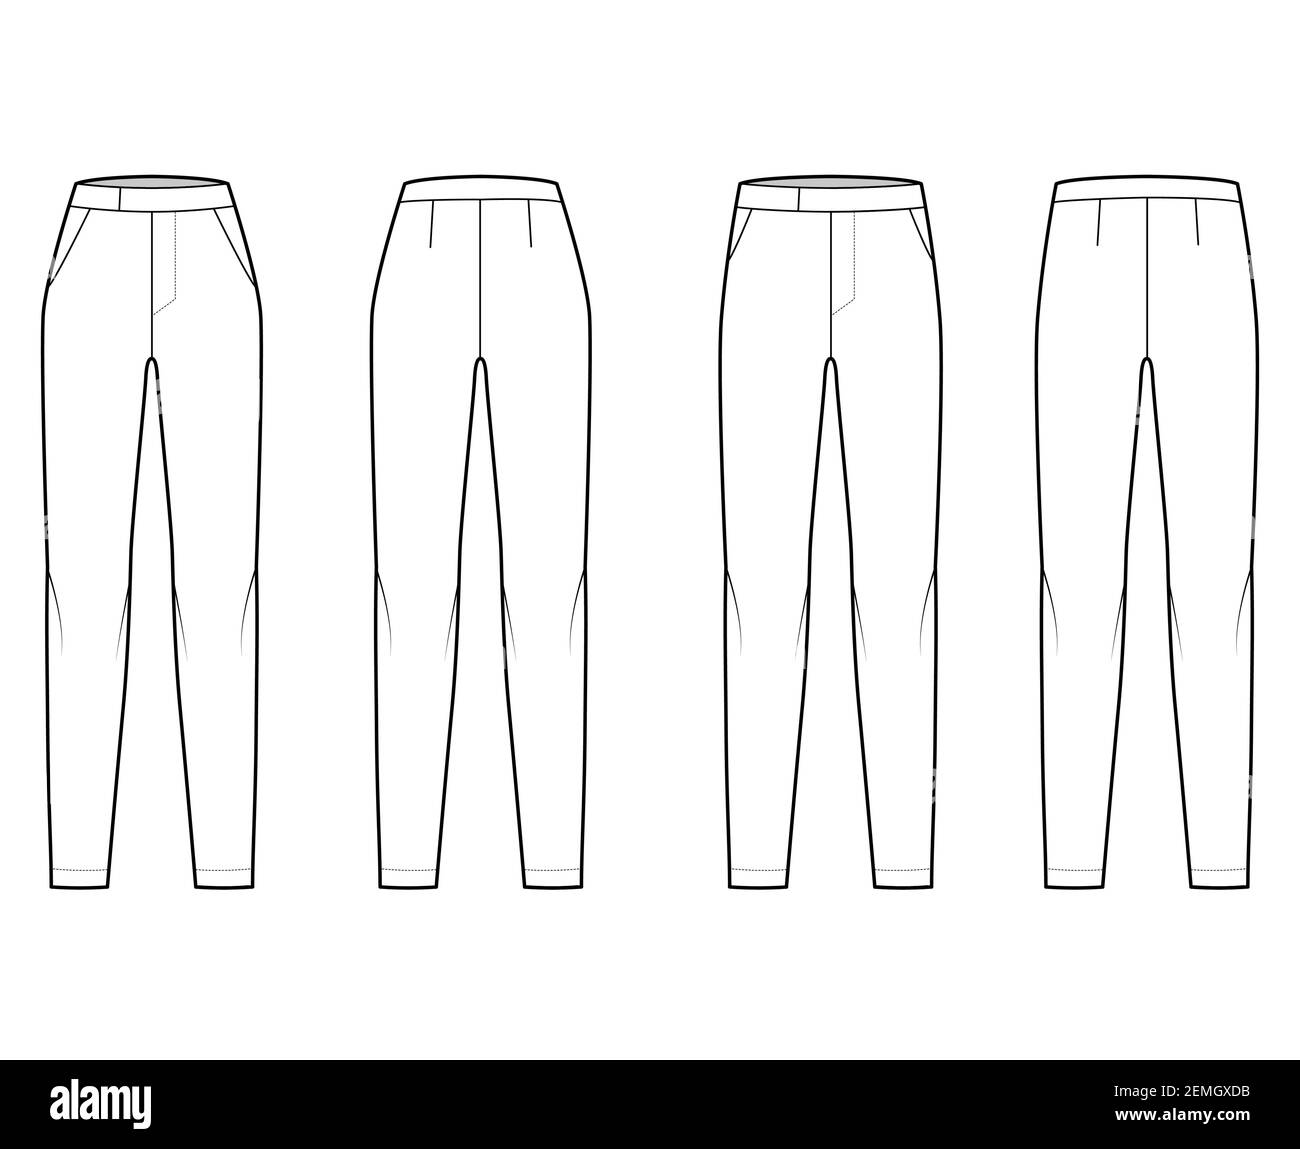 Set of cigarette Pants technical fashion illustration with extended normal  low waist, high rise, full length